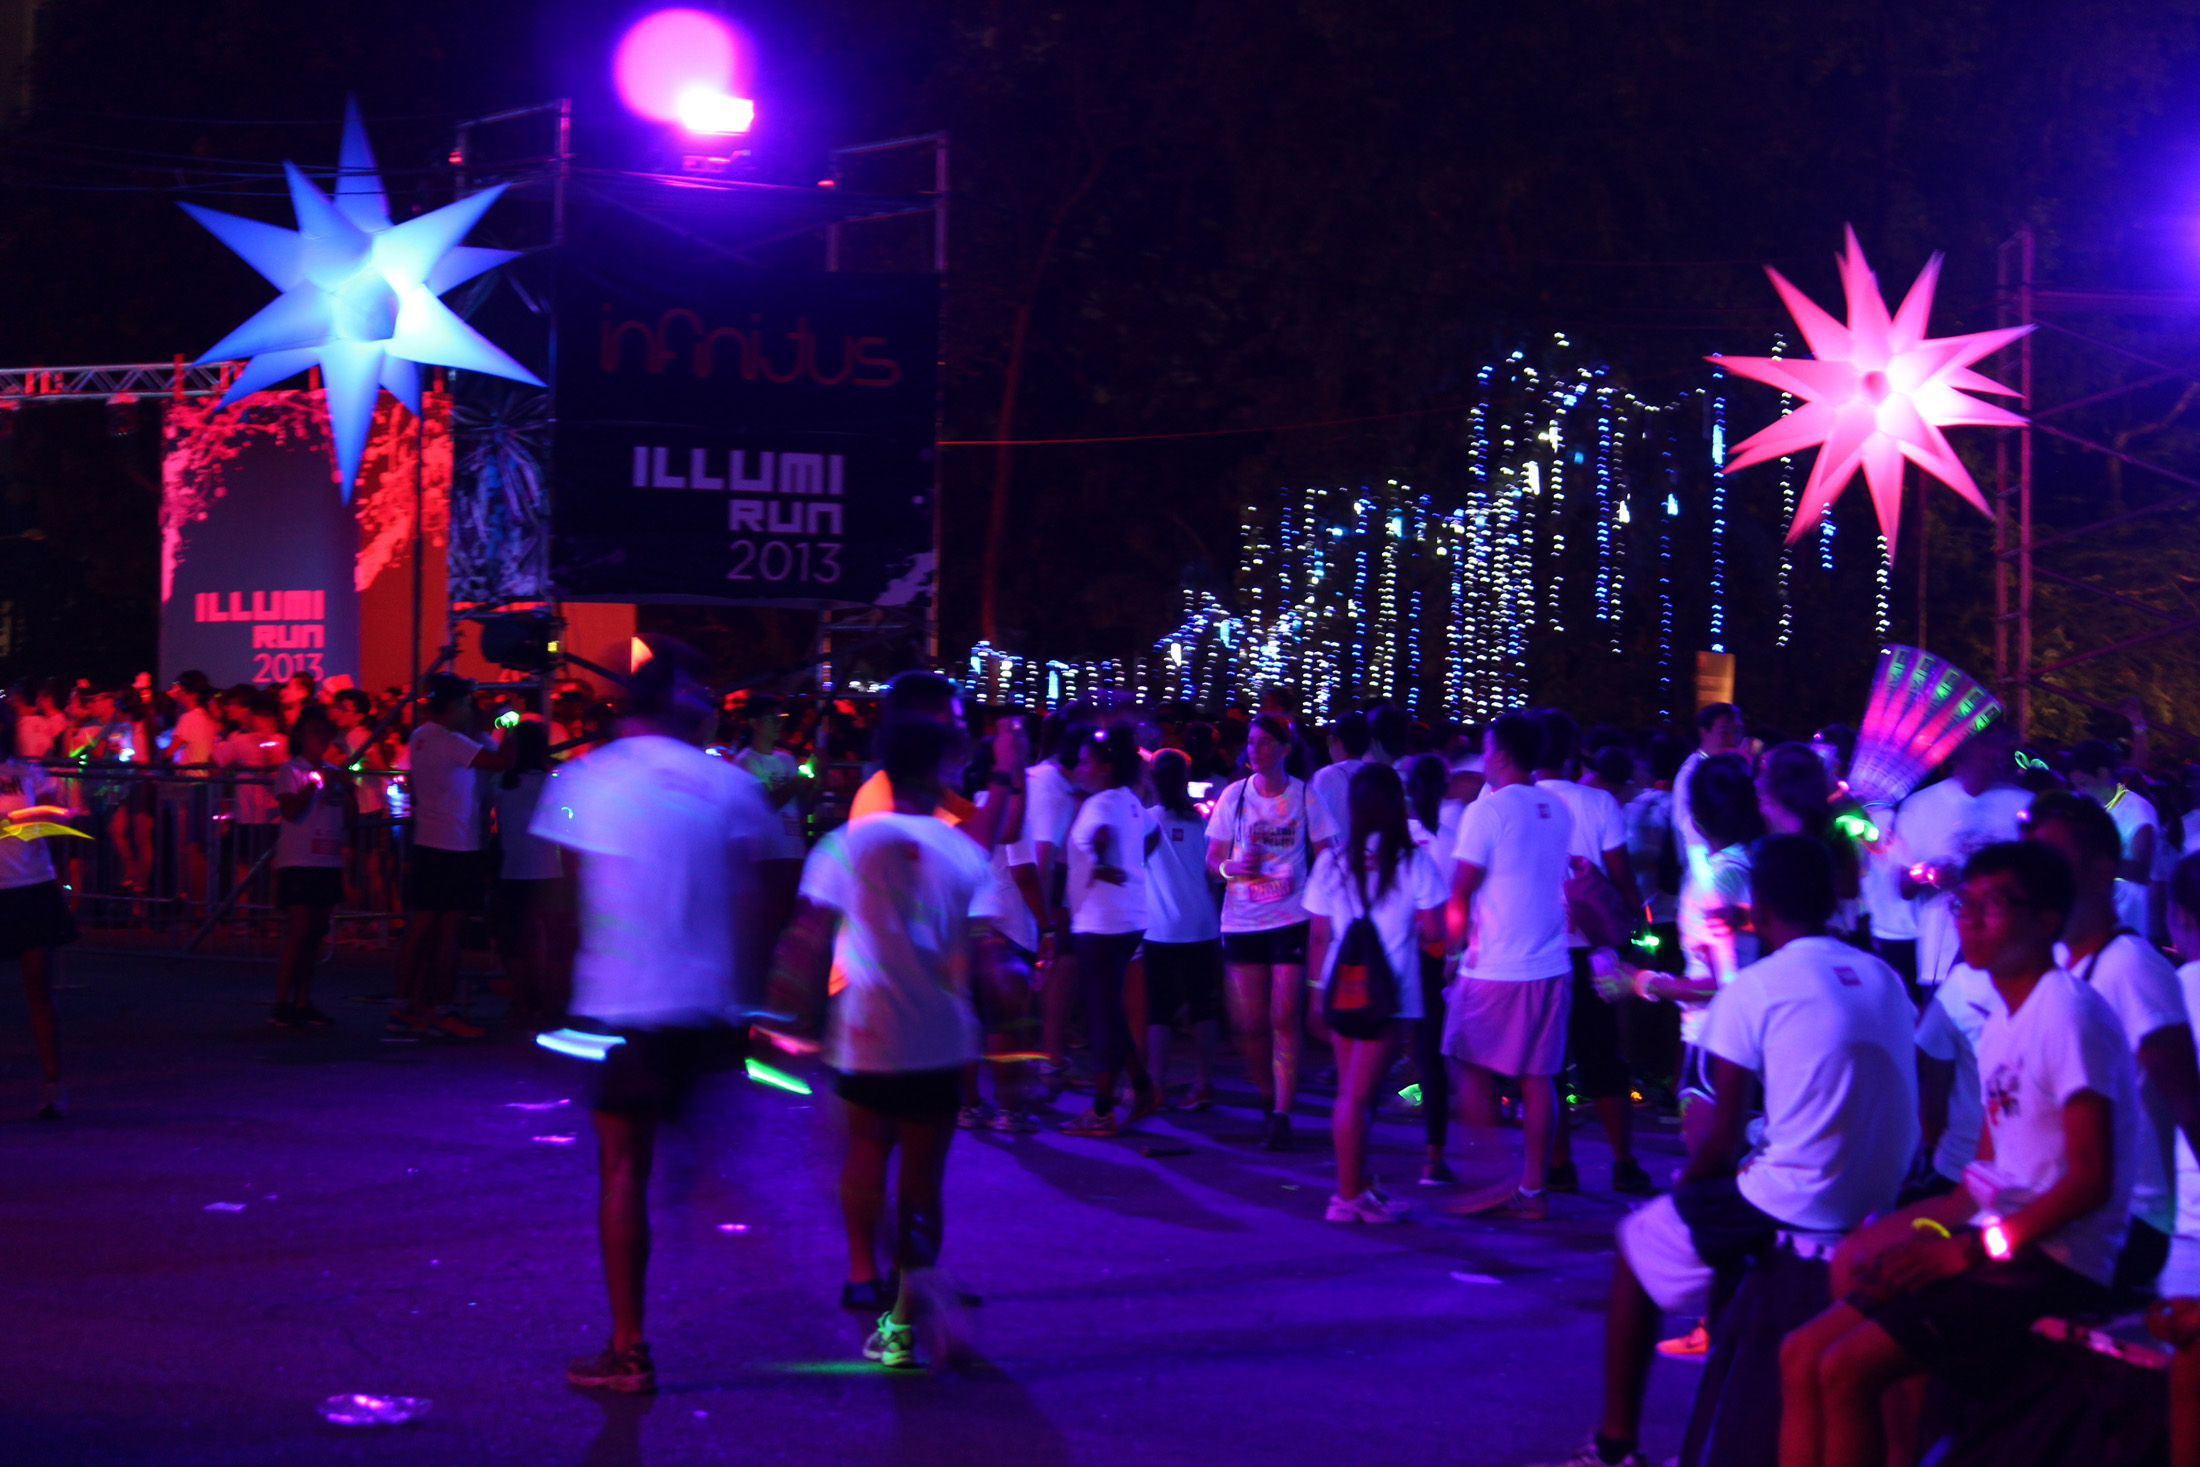 RUNNING IN THE DARK: Close to 10,000 people took part in the inaugural run, accessorising themselves with light sticks and other items that caught attention in the dark of the night. (Photo: Geneieve Teo)